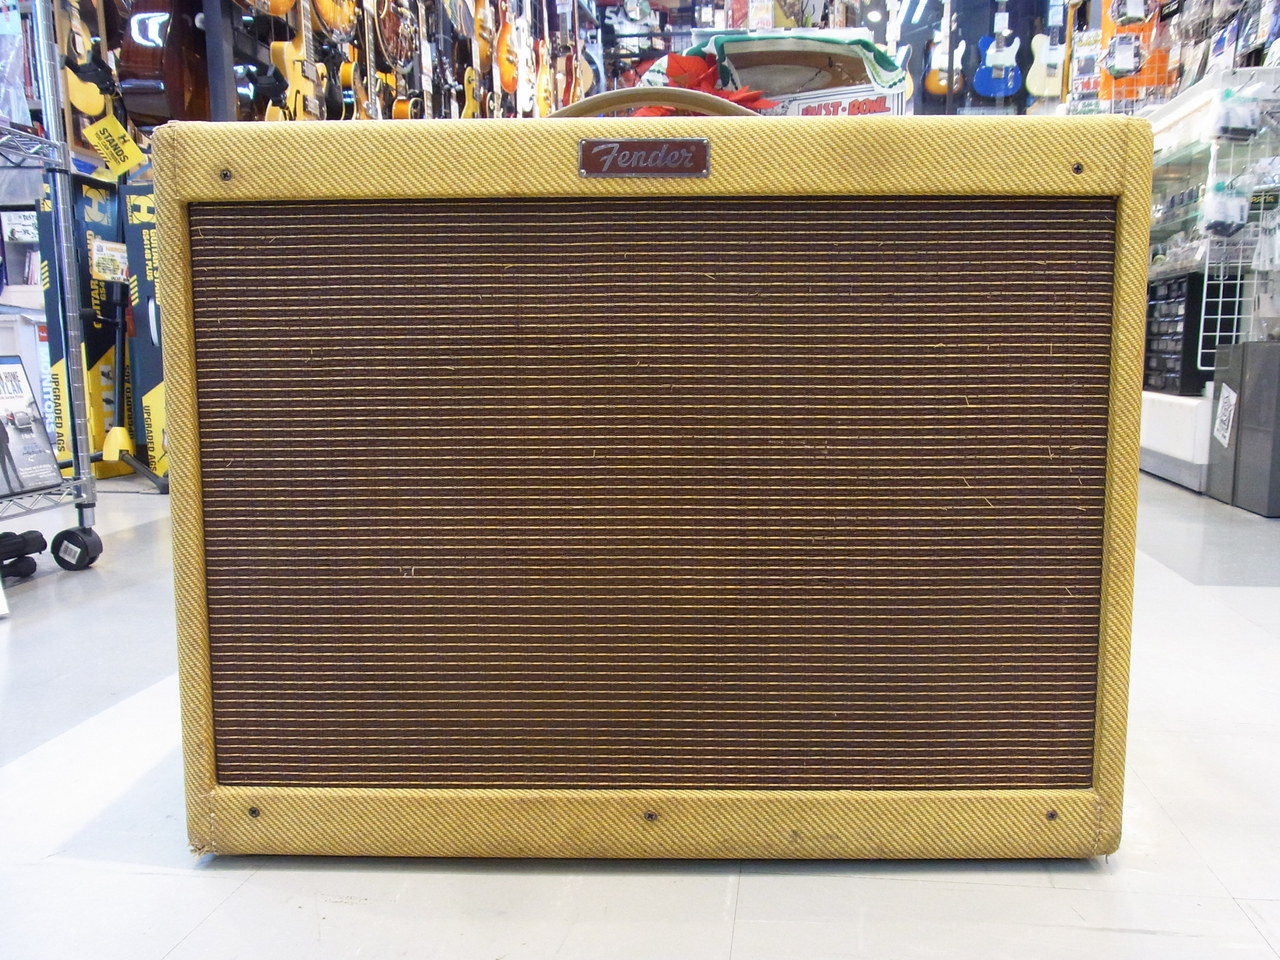 Fender Blues Deluxe 【Made in USA 1996年製】（中古）【楽器検索 